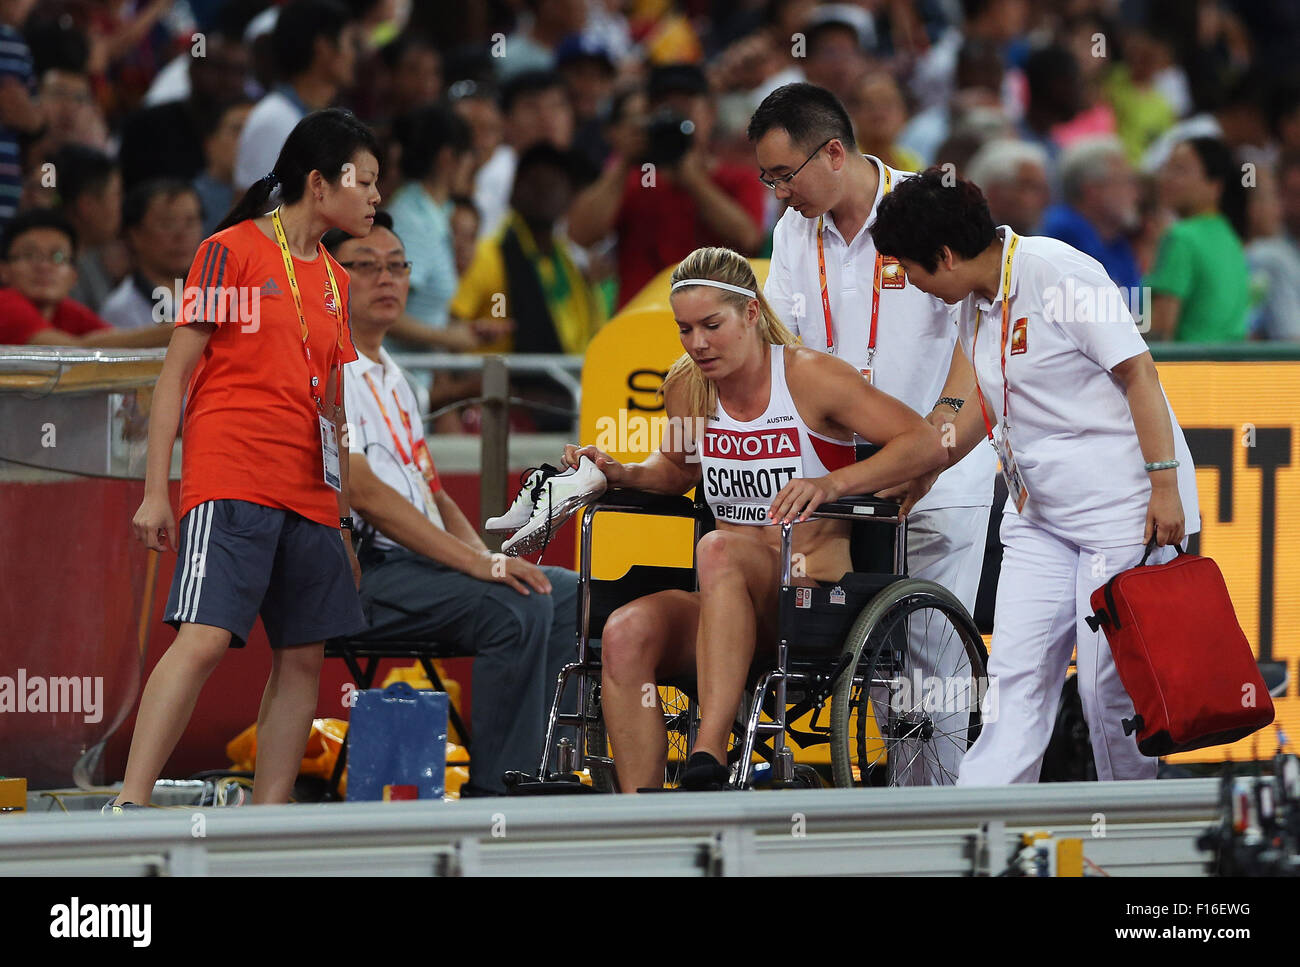 Beijing, China. 28th Aug, 2015. Austria's Beate Schrott leaves the stadium in a wheelchair after falling during the women's 100m hurdles semifinal at the 2015 IAAF World Championships at the 'Bird's Nest' National Stadium in Beijing, capital of China, Aug. 28, 2015. Credit:  Cao Can/Xinhua/Alamy Live News Stock Photo